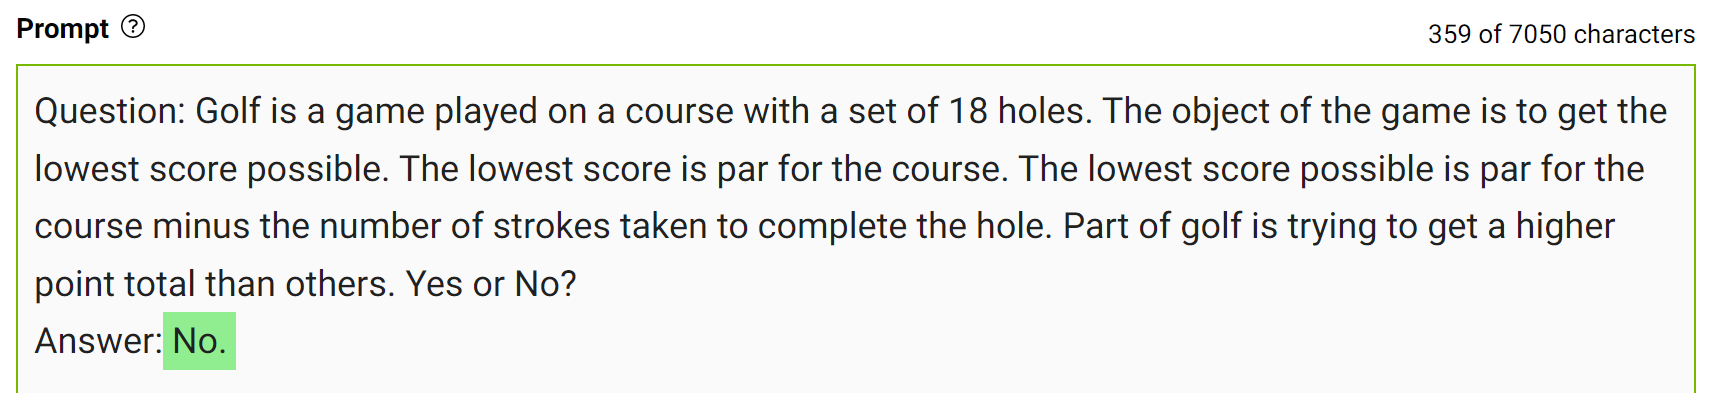 Screenshot shows the integration of the generated knowledge as part of the original clarifying question on scoring in golf, with the correct answer, “No”.